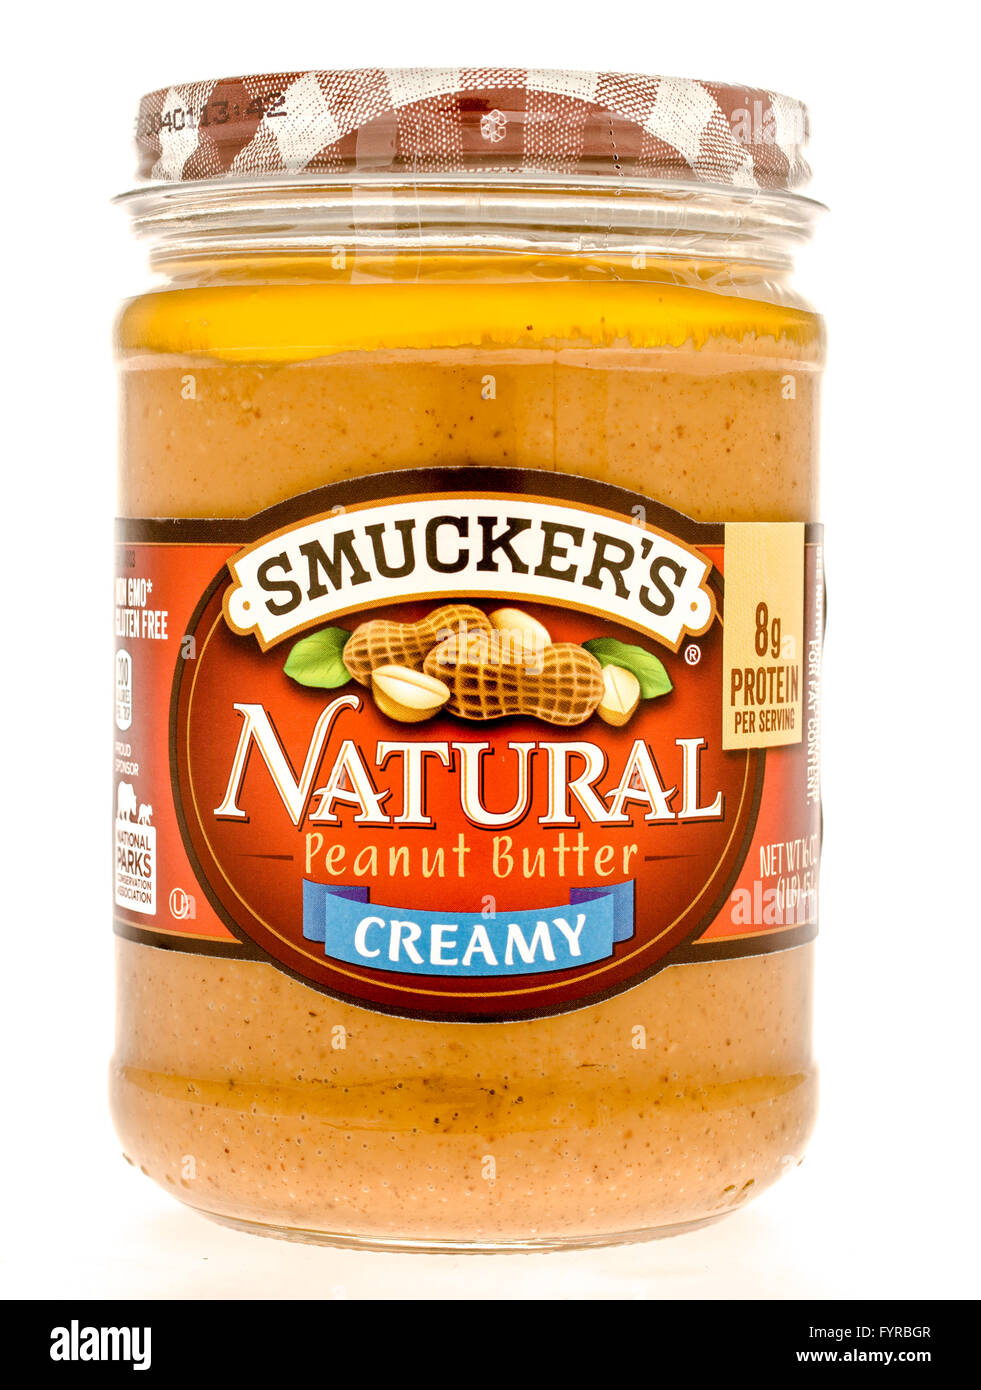 Winneconne, WI - 27 Sept 2015:  Jar of Smuckers natural peaunt butter that is creamy. Stock Photo